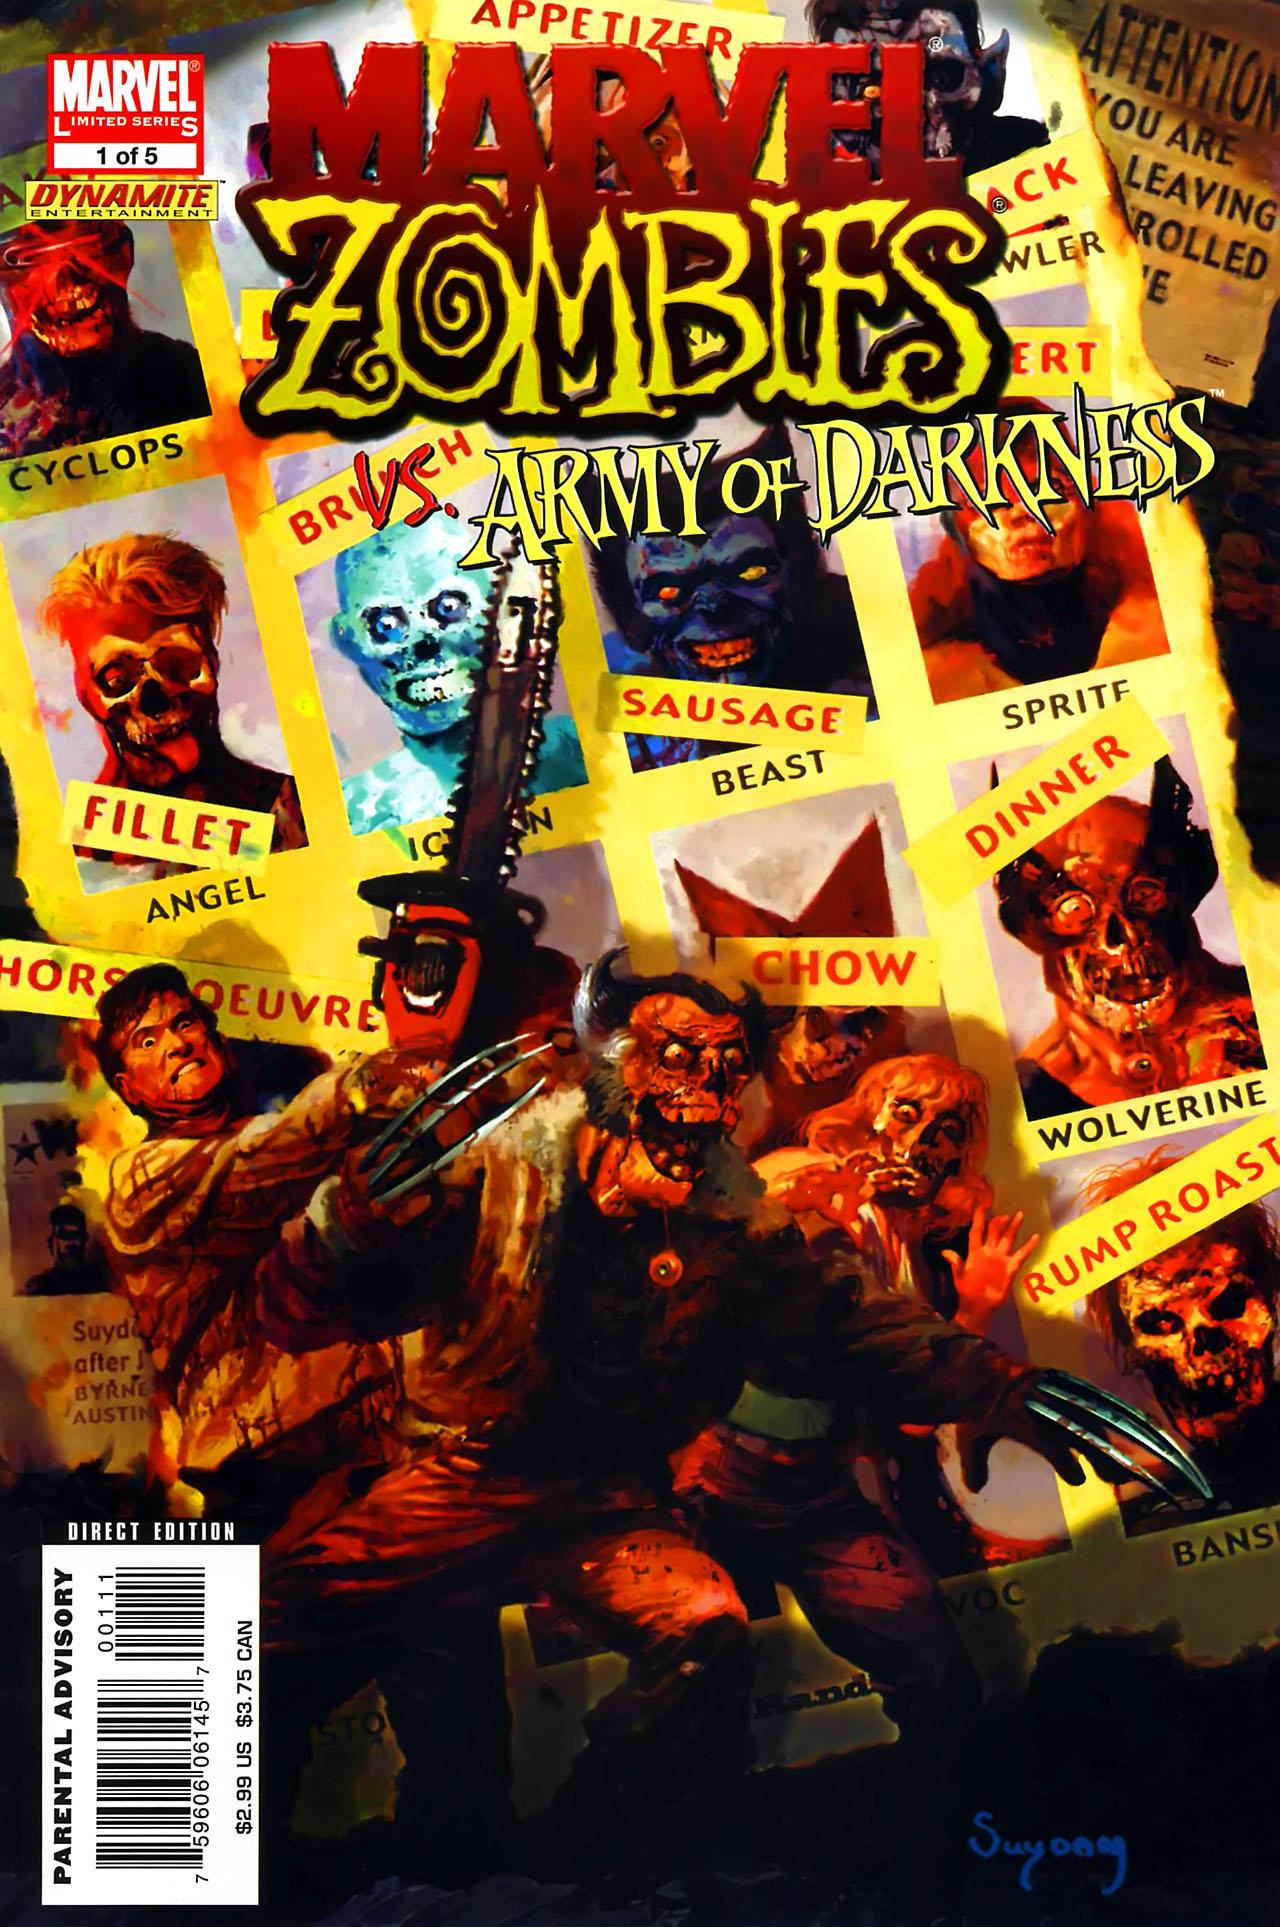 Marvel Zombies Vs. Army of Darkness Vol. 1 #1